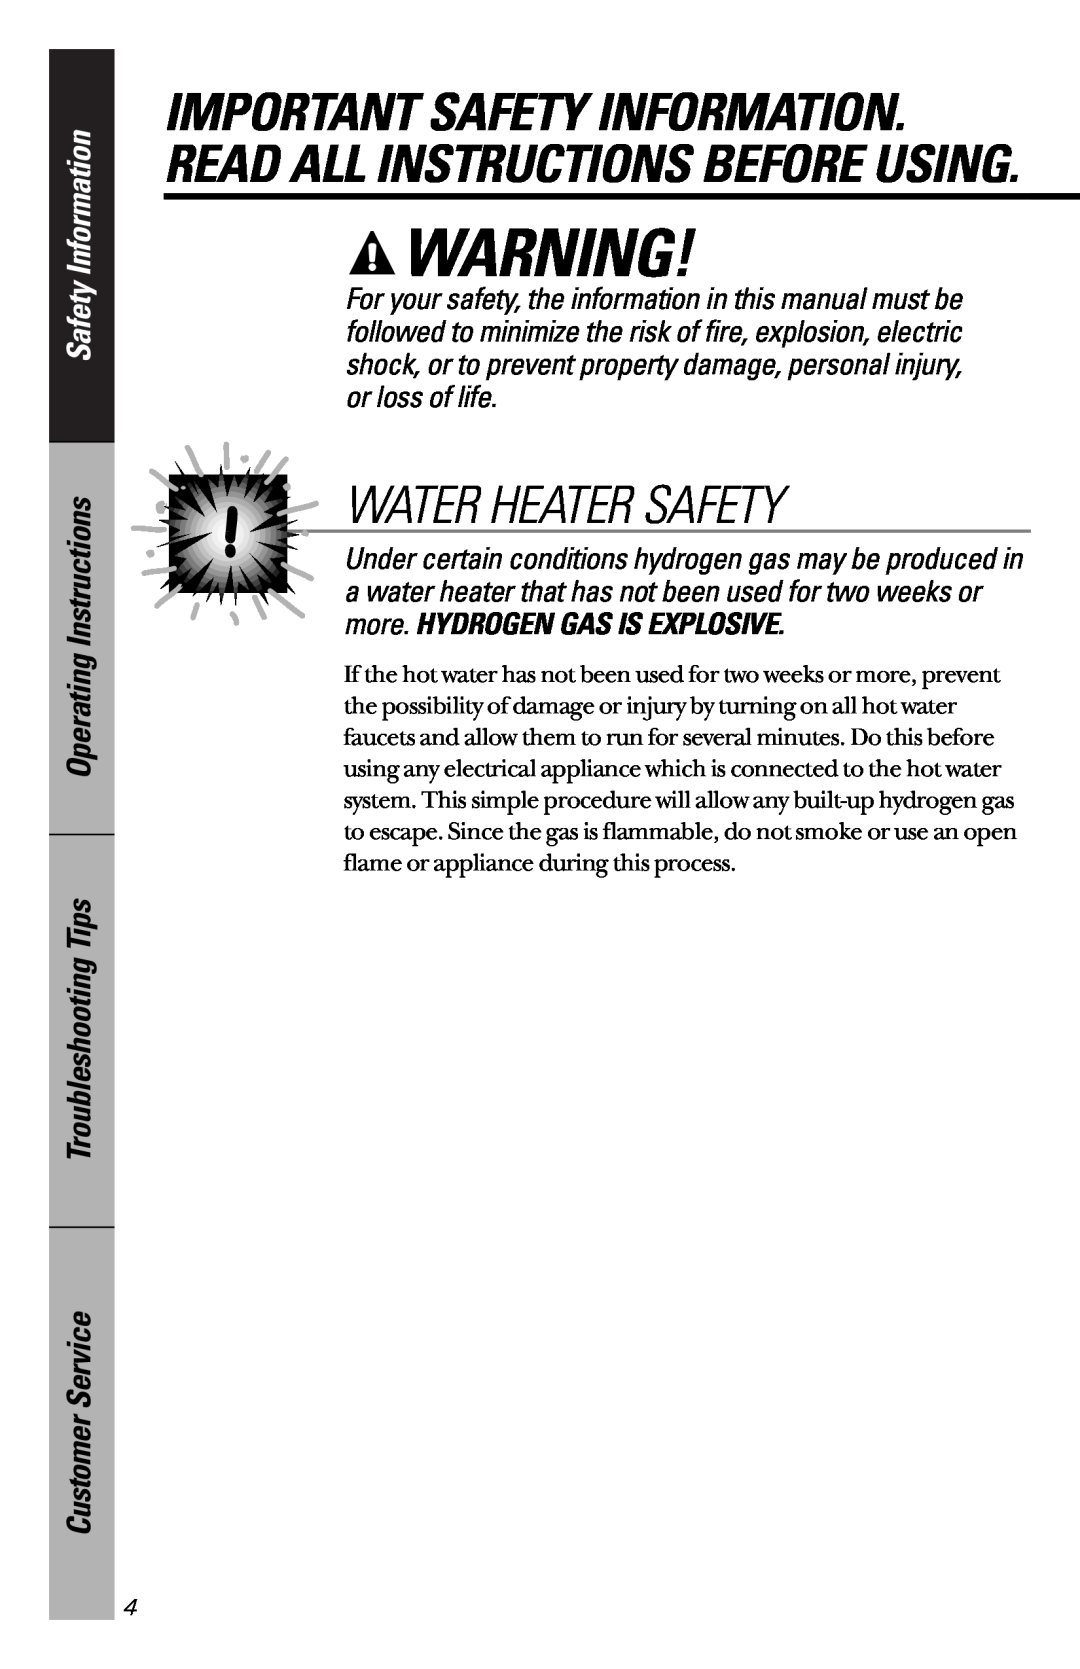 GE GSC3200 owner manual Water Heater Safety, Important Safety Information. Read All Instructions Before Using 